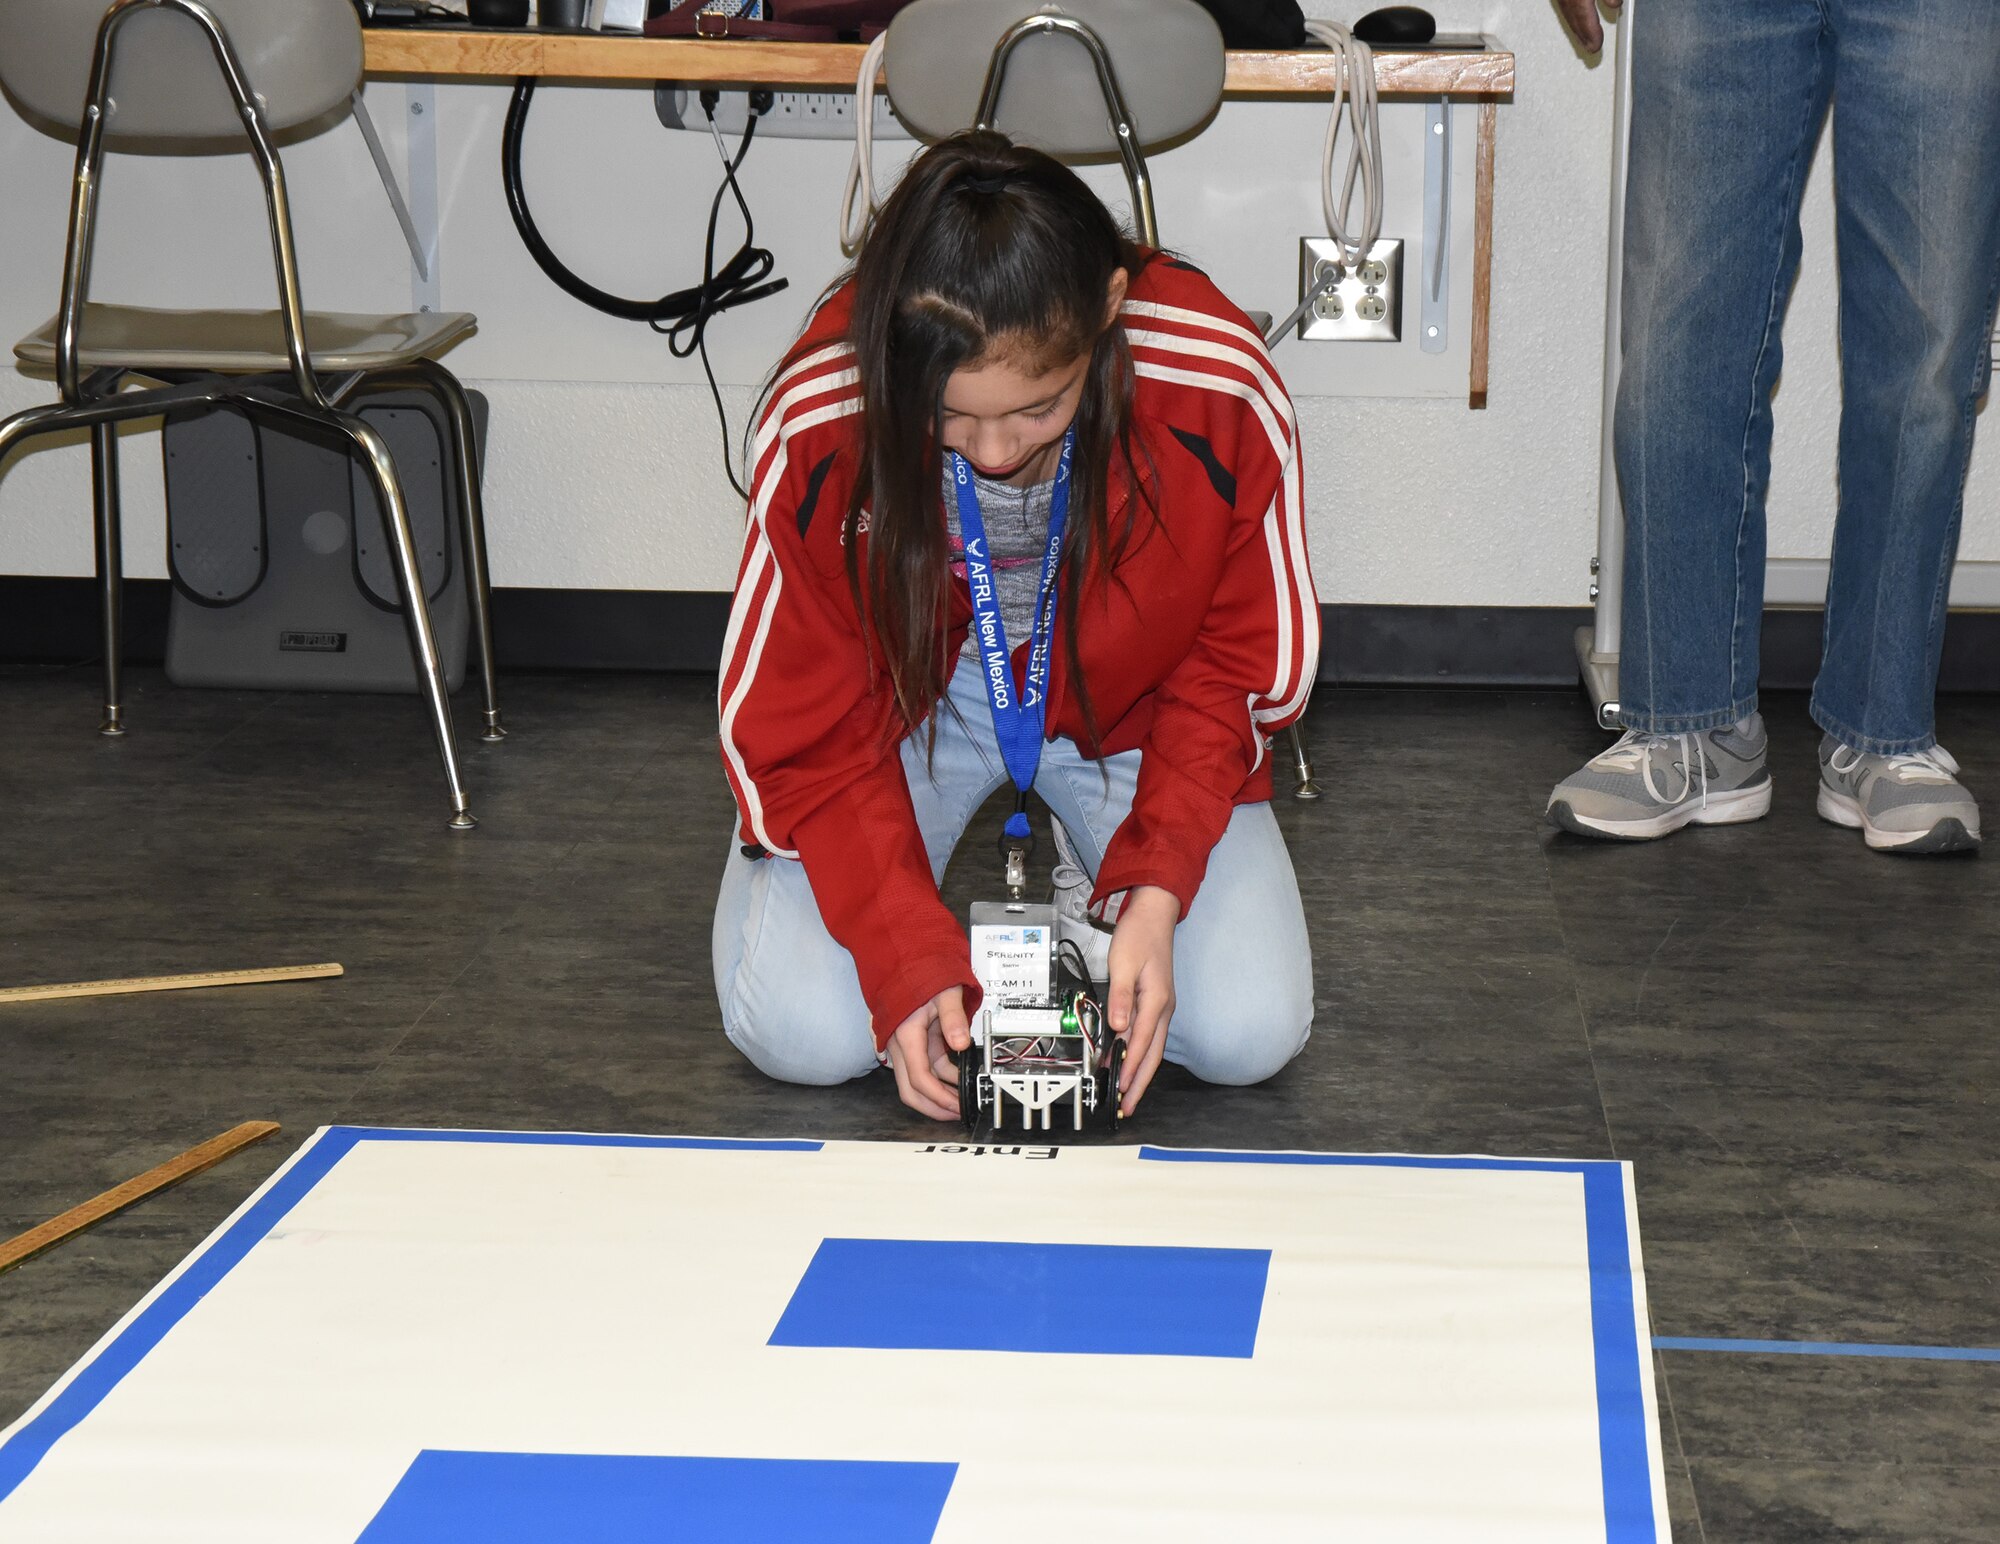 After programming her robot, Serenity Smith, a sixth grader from Mesa View Elementary School, tests it on a simple maze at the Air Force Research Laboratory's La Luz Academy Robotic Challenge Expo March 9 at Kirtland. Smith was one of more than 100 students from around the state that competed at the event.